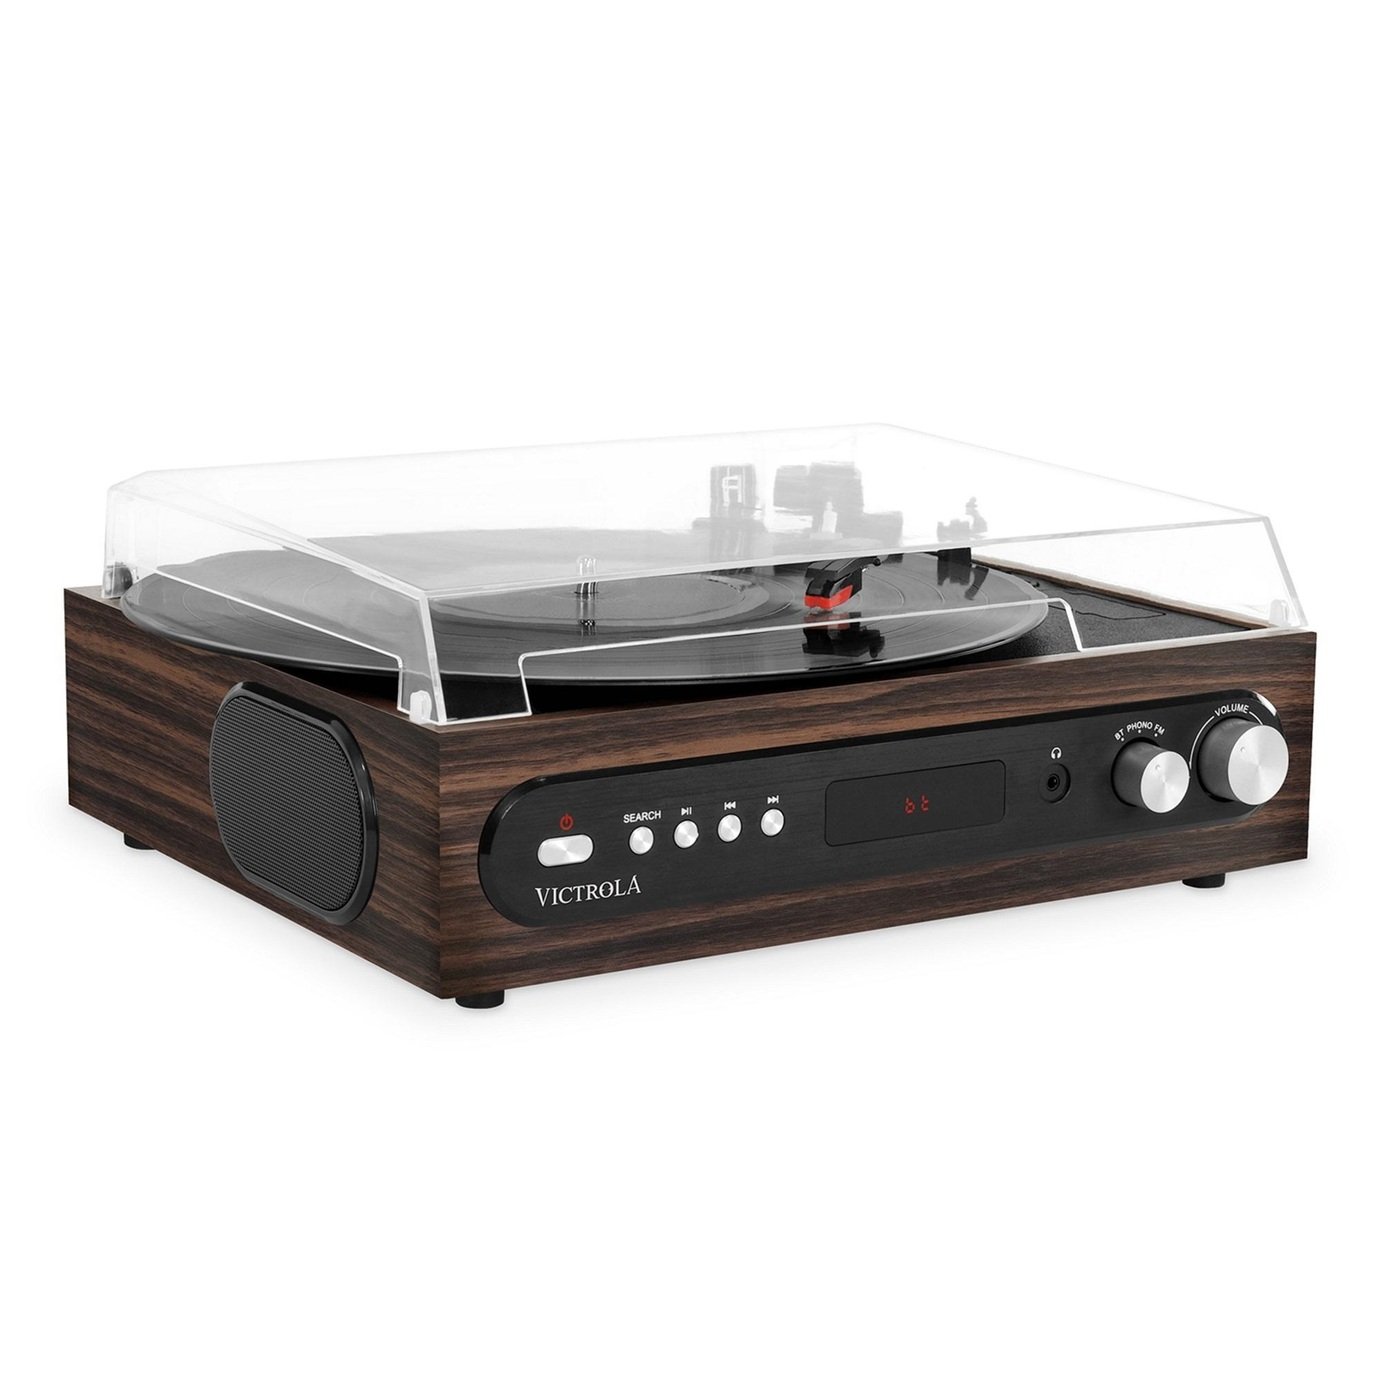 Victrola VTA-65 All-in-1 Turntable Review